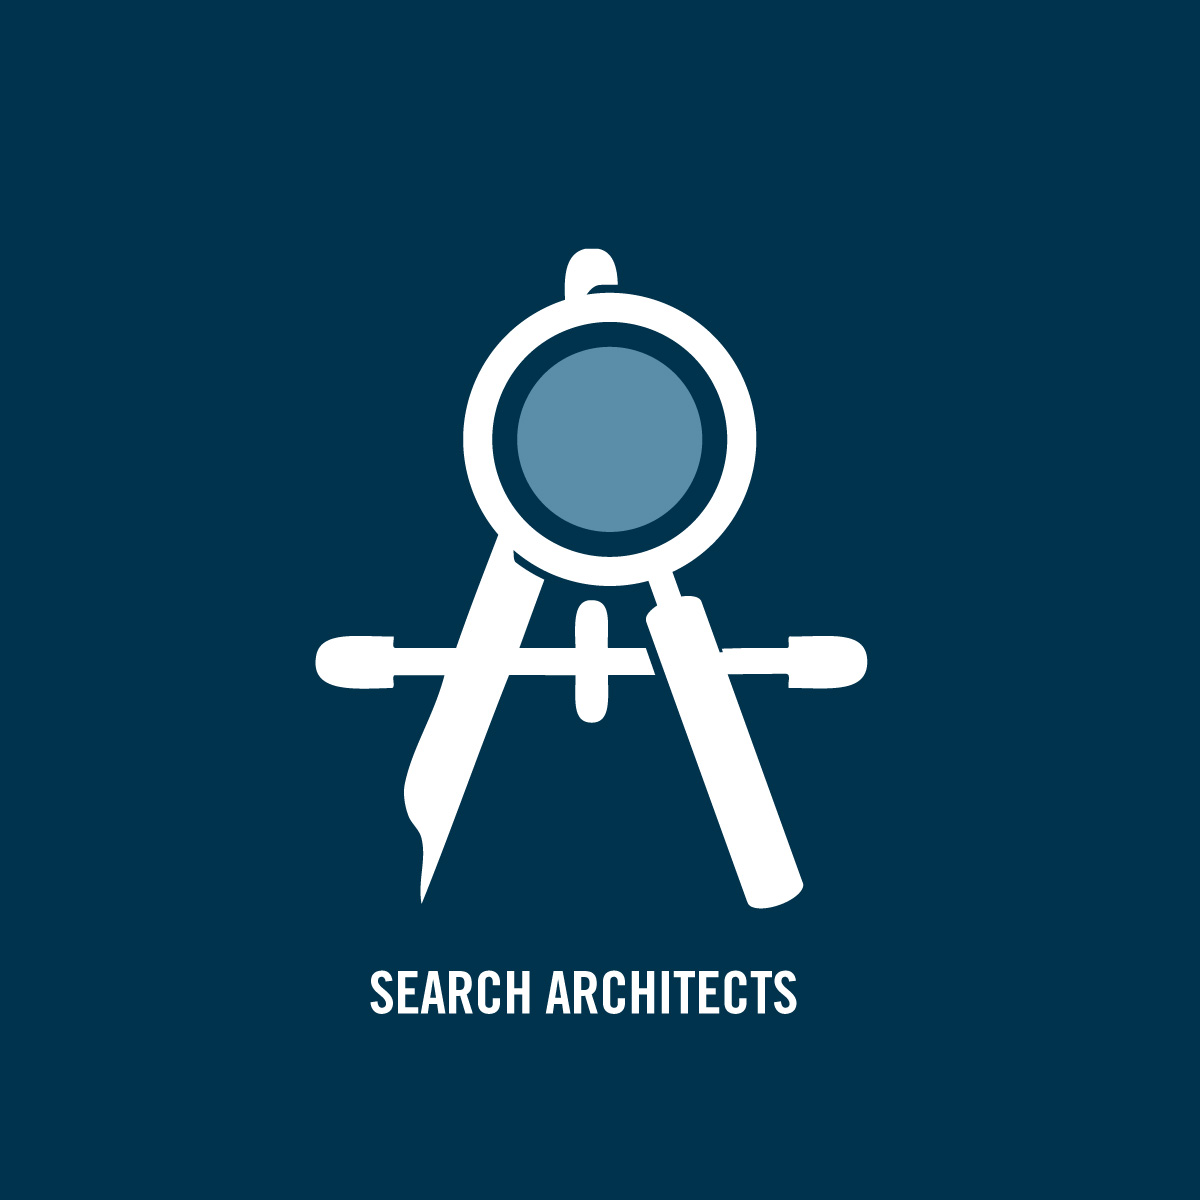 Search Architects logo